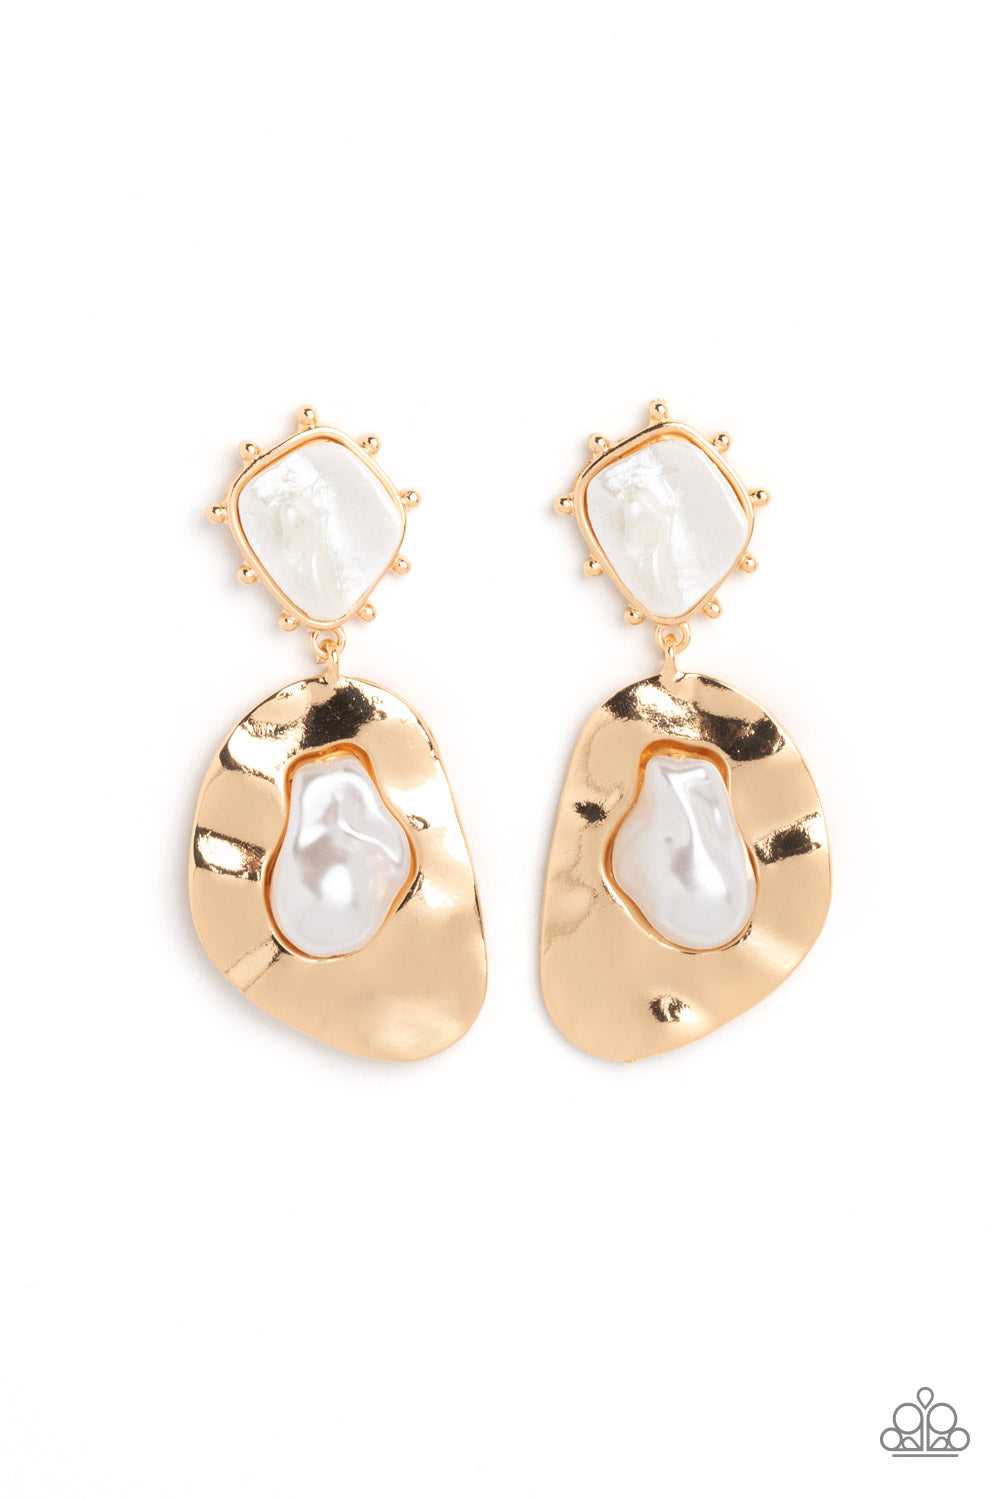 Rippling Rhapsody Gold Post Earring - Paparazzi Accessories   An oversized hammered, asymmetrical gold disc dangles from a more dainty, asymmetrical gold frame, accented with raised gold studs around its edges. Pressed in the center of the studded display, an abstract, white shell with a pearlized finish shines while a baroque pearl gleams for a refined finish inside the oversized display. Earring attaches to a standard post fitting.  Sold as one pair of post earrings.